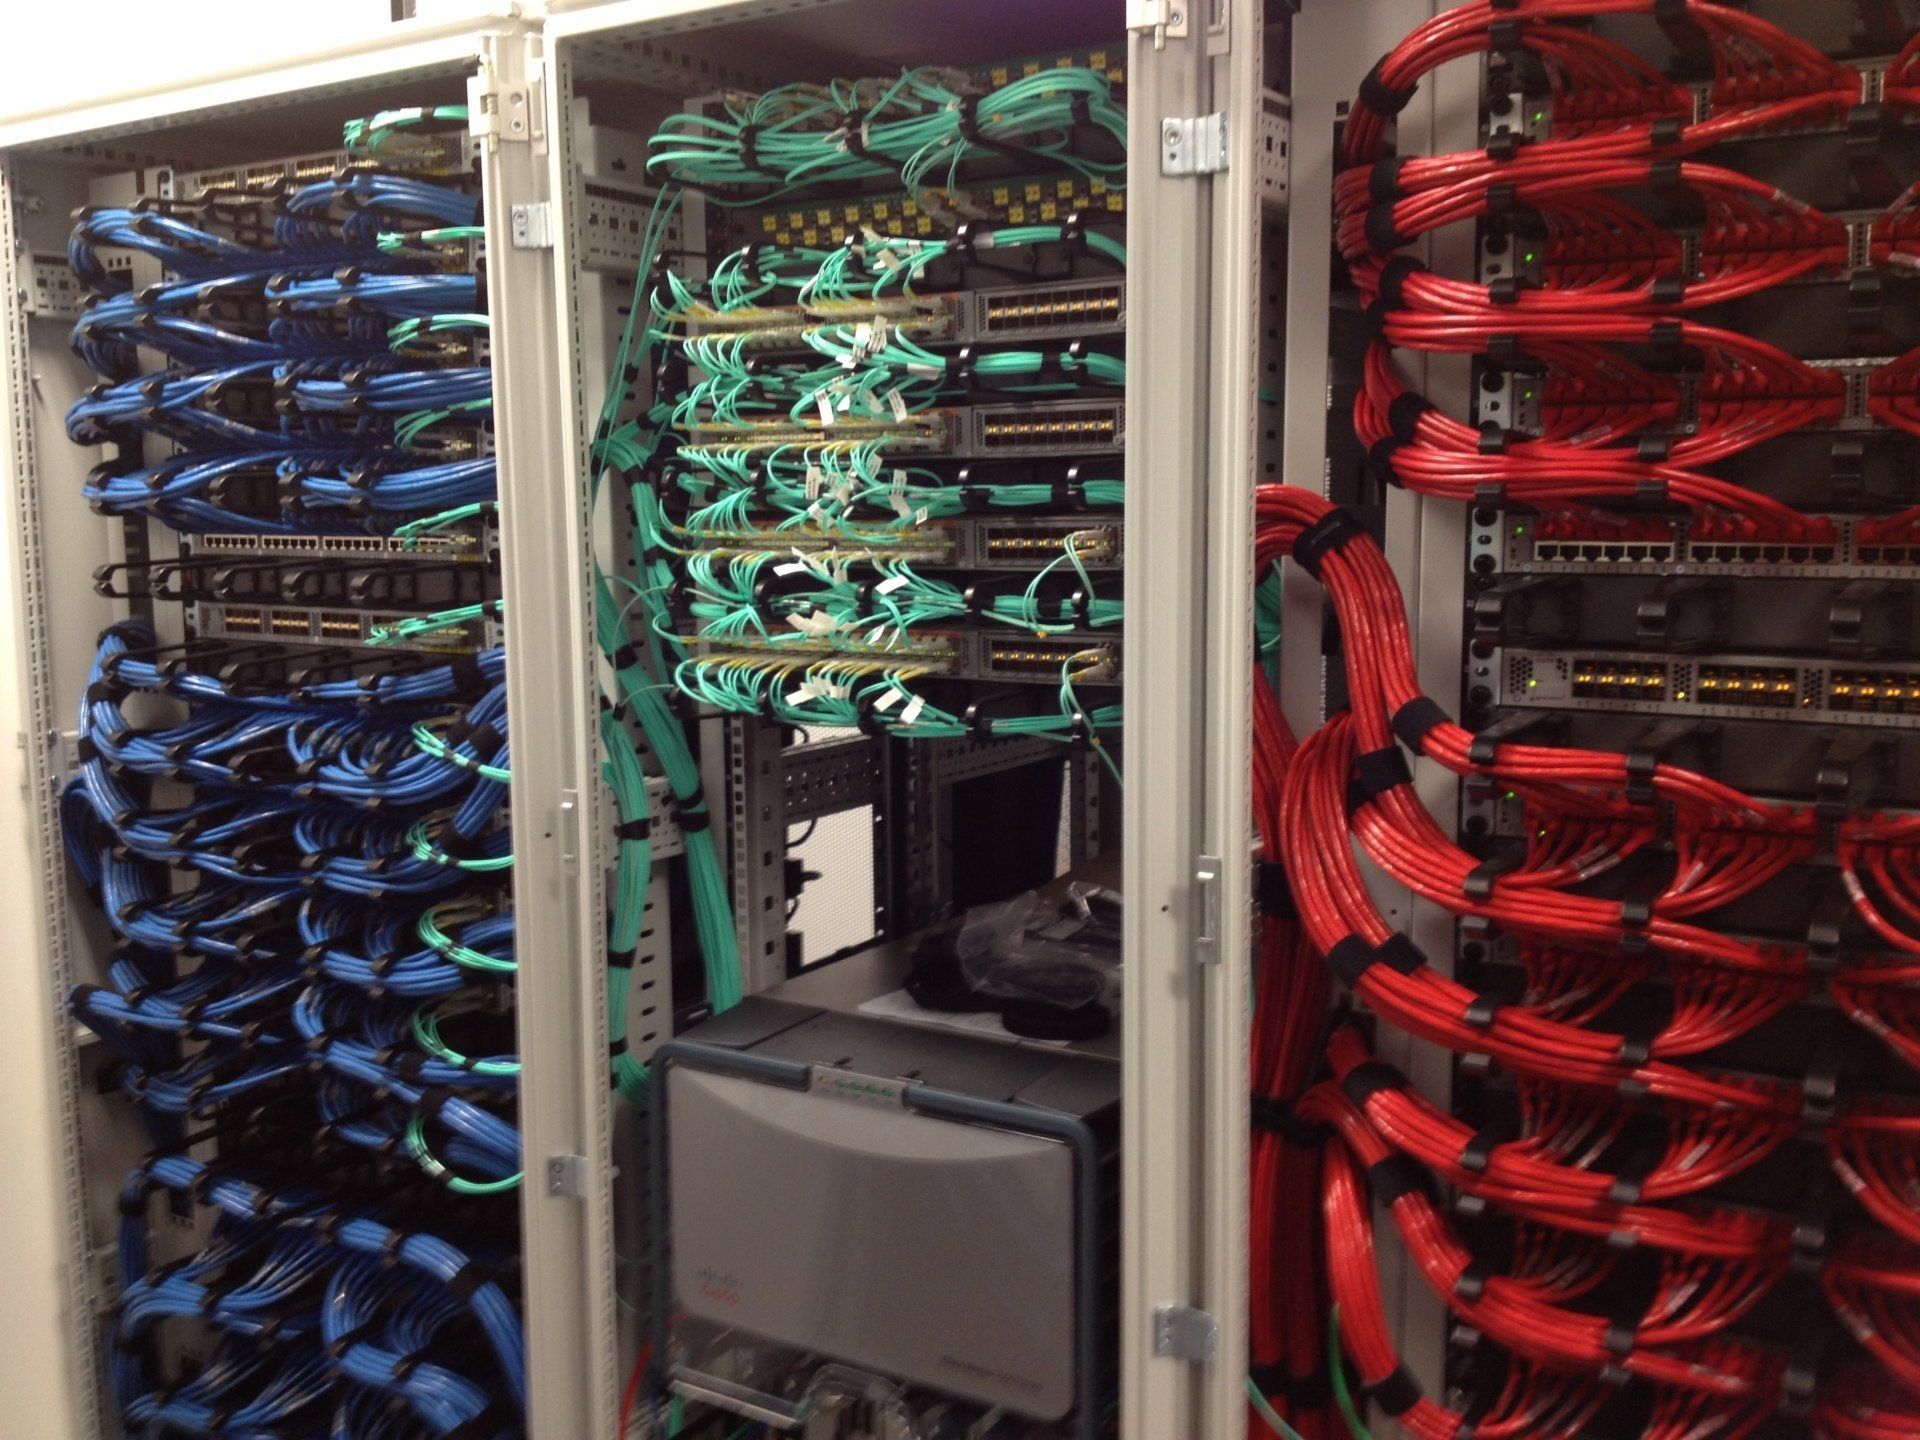 servers with cabling